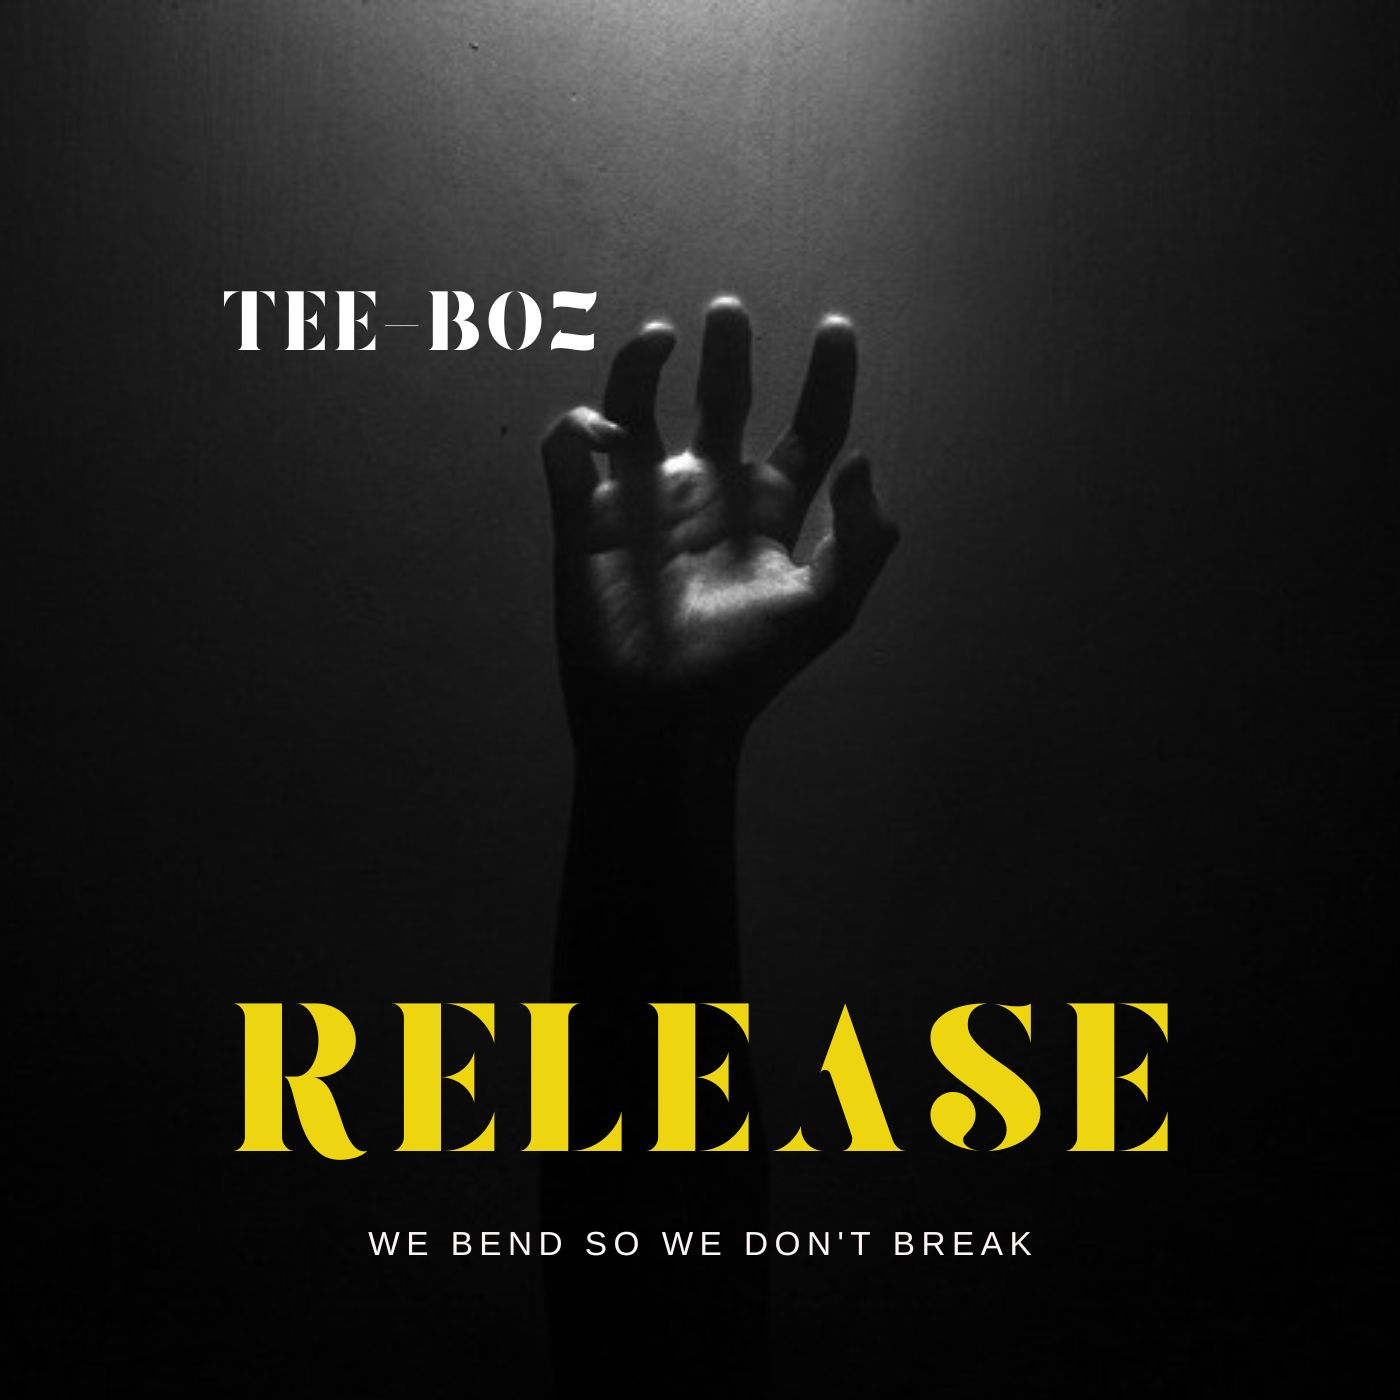 Holy Melodies - Ba'Busy Records(Teeboz Irhass)